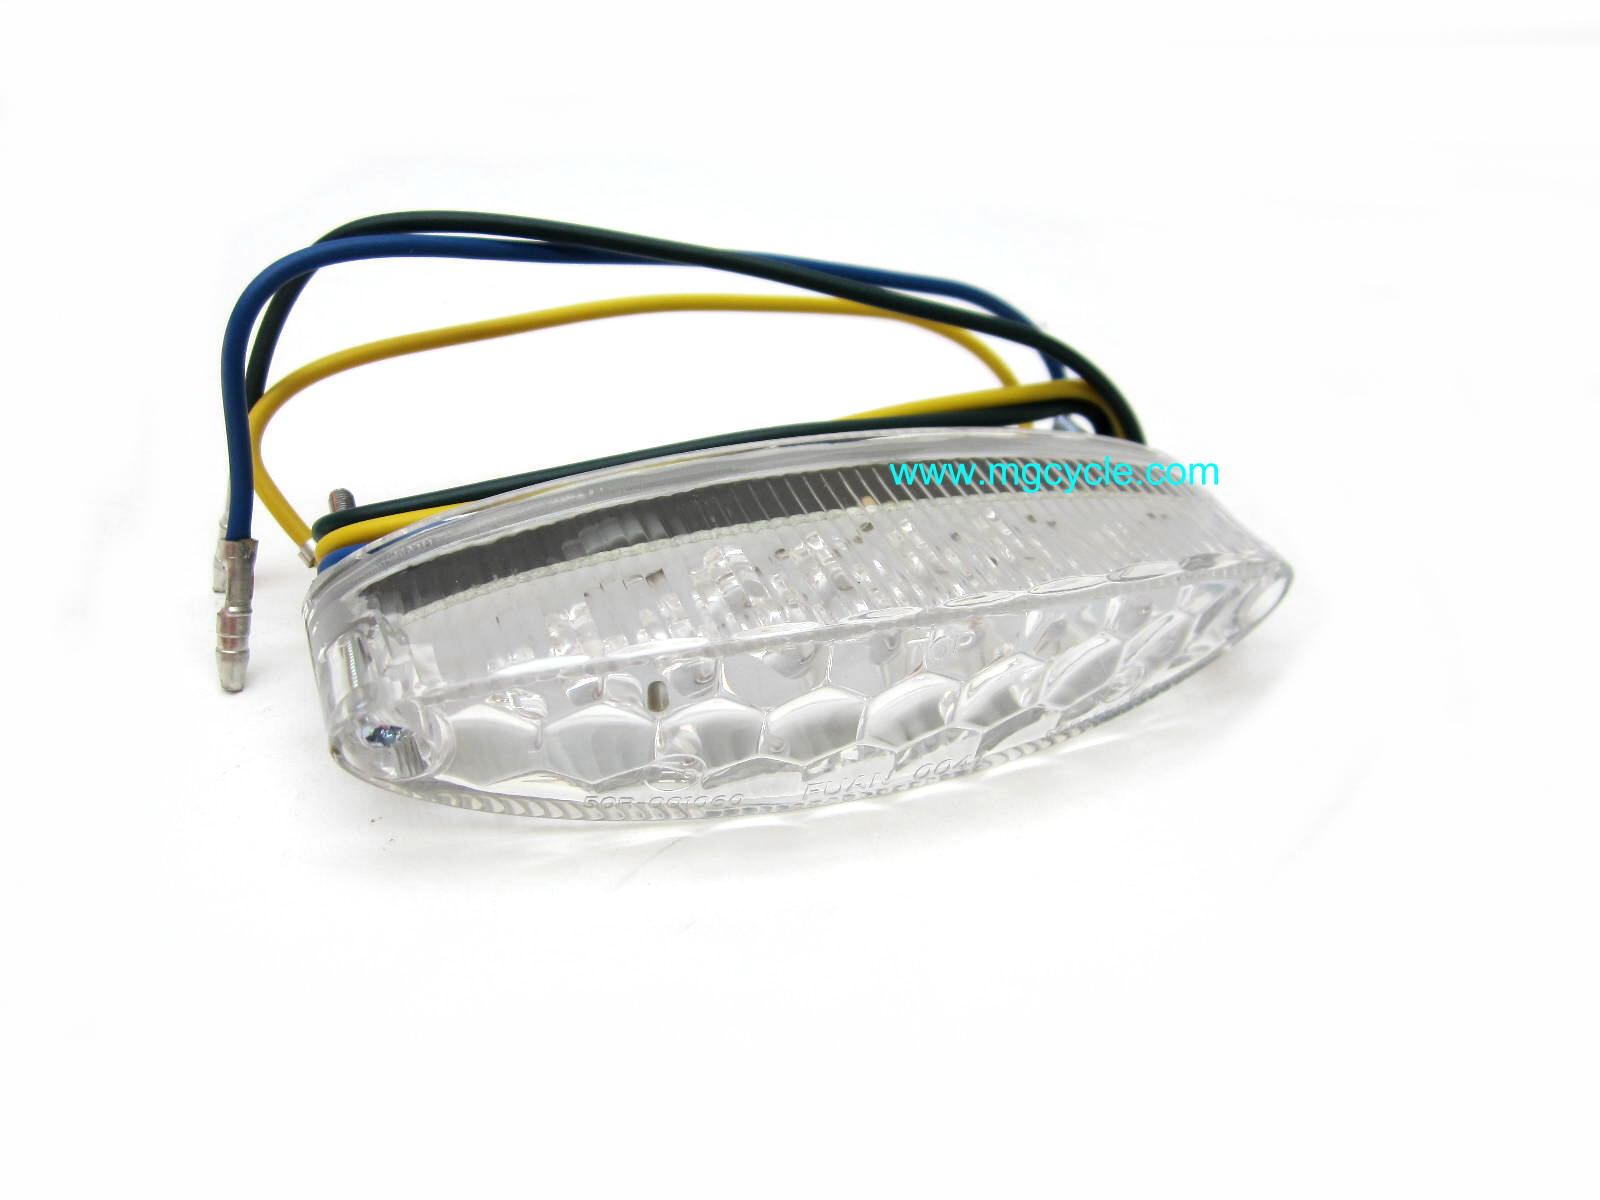 Replacement tail light for fender eliminator